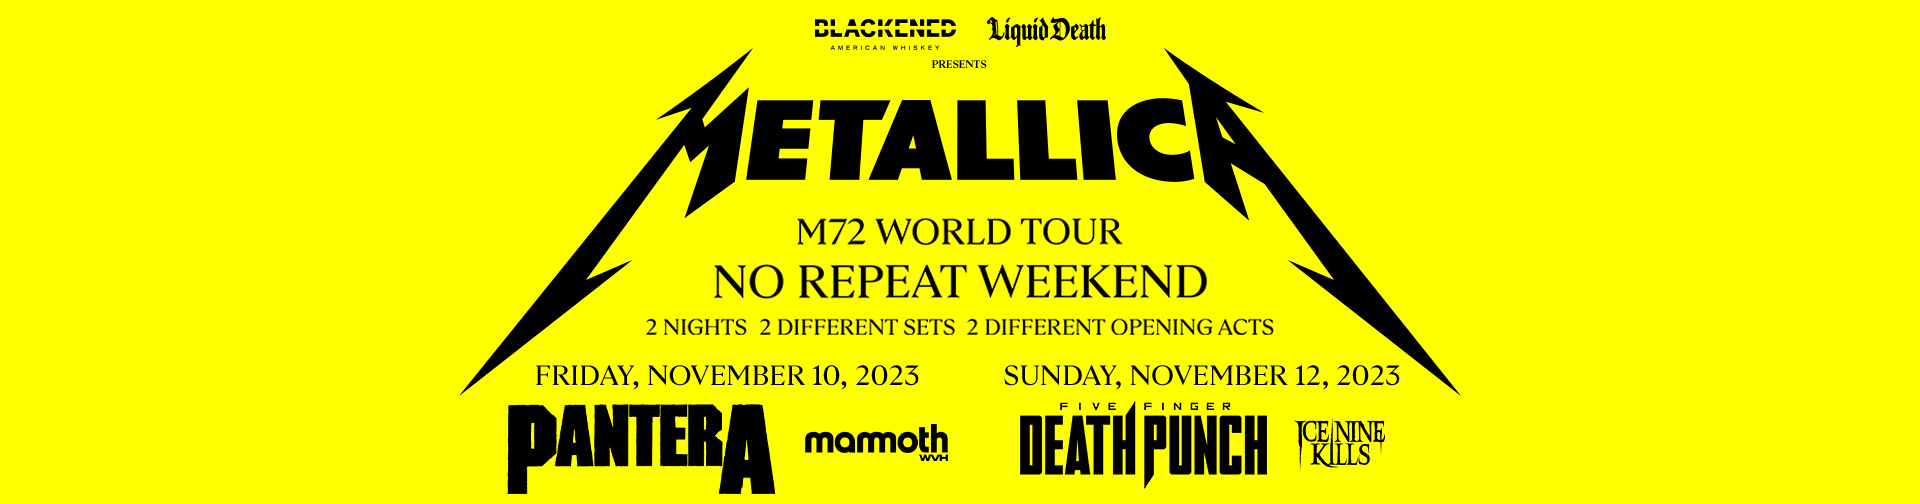 Metallica at Ford Field in Detroit, MI, United States on November 12